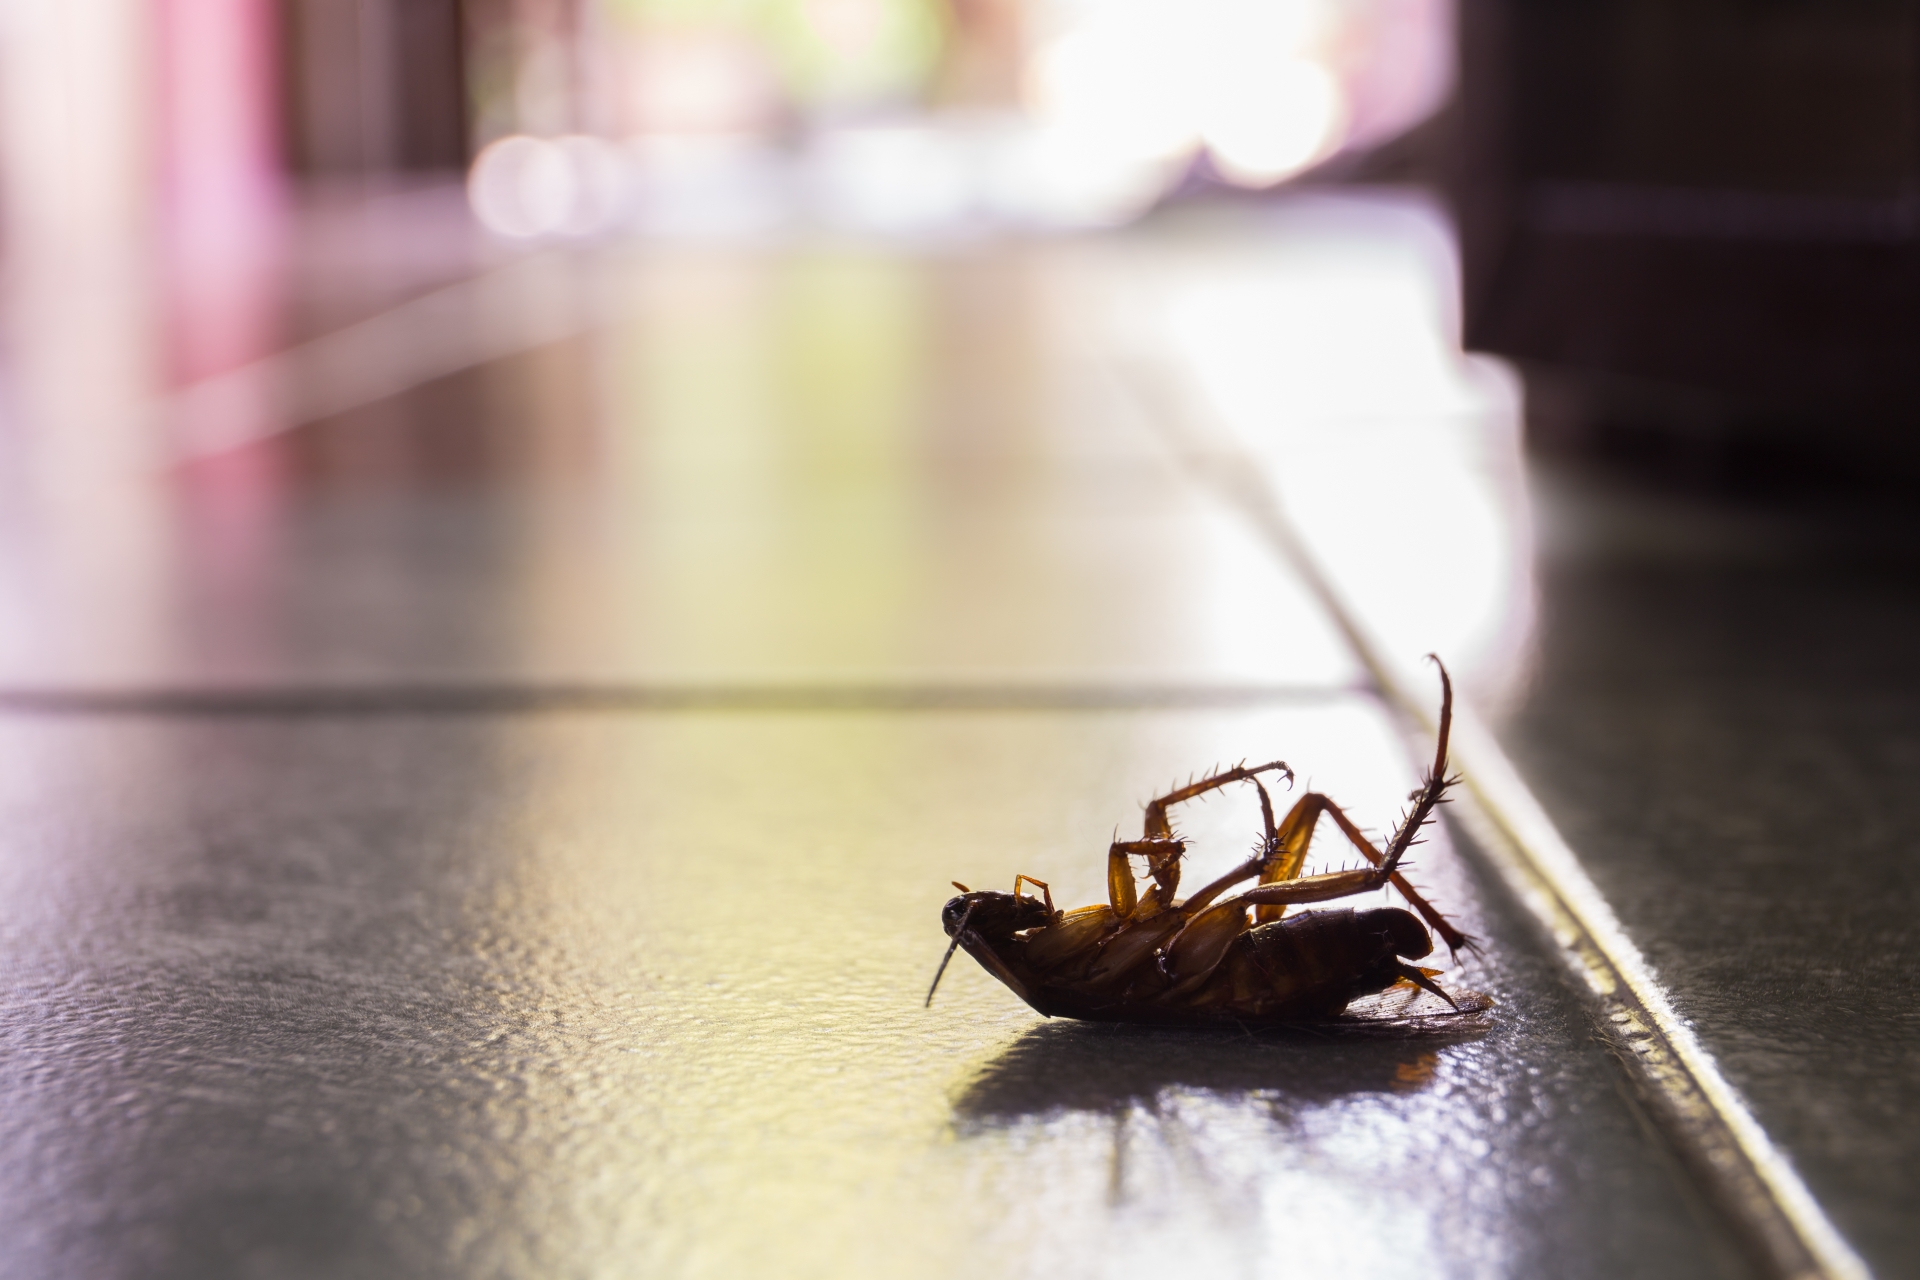 Cockroach Control, Pest Control in Fulham, SW6. Call Now 020 8166 9746